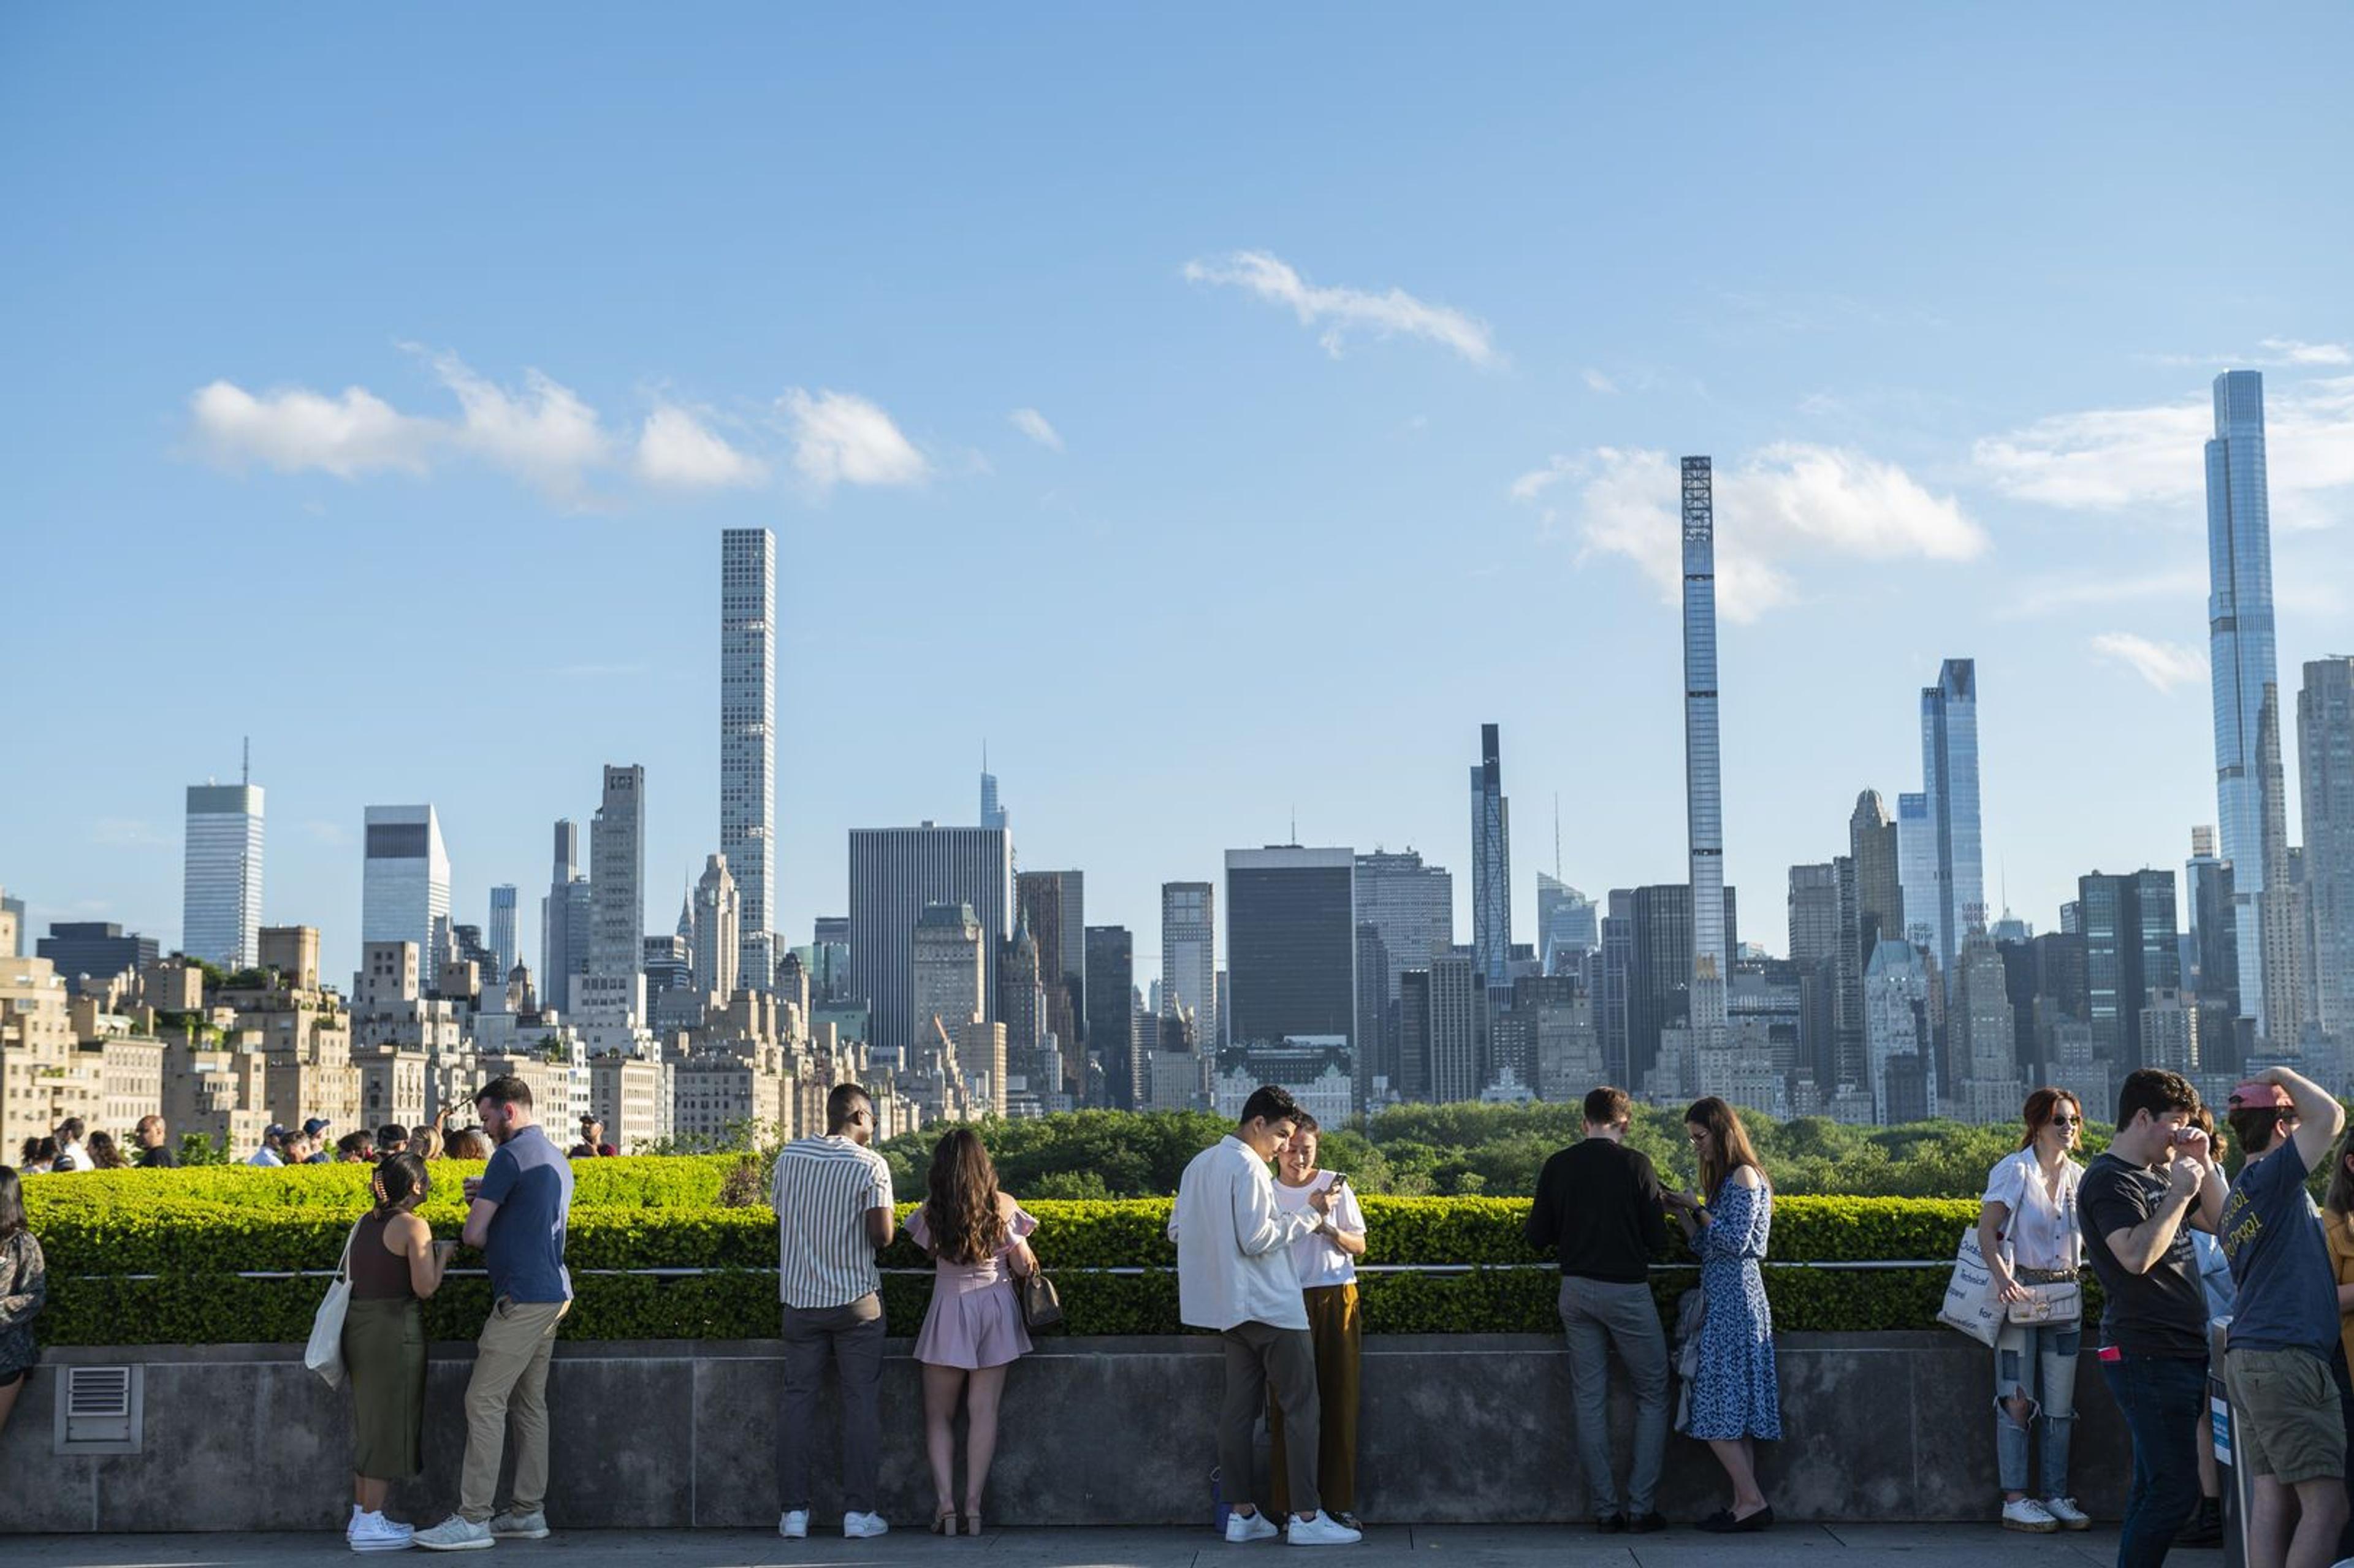 Visitors stand on a rooftop overlooking the New York City Skyline.